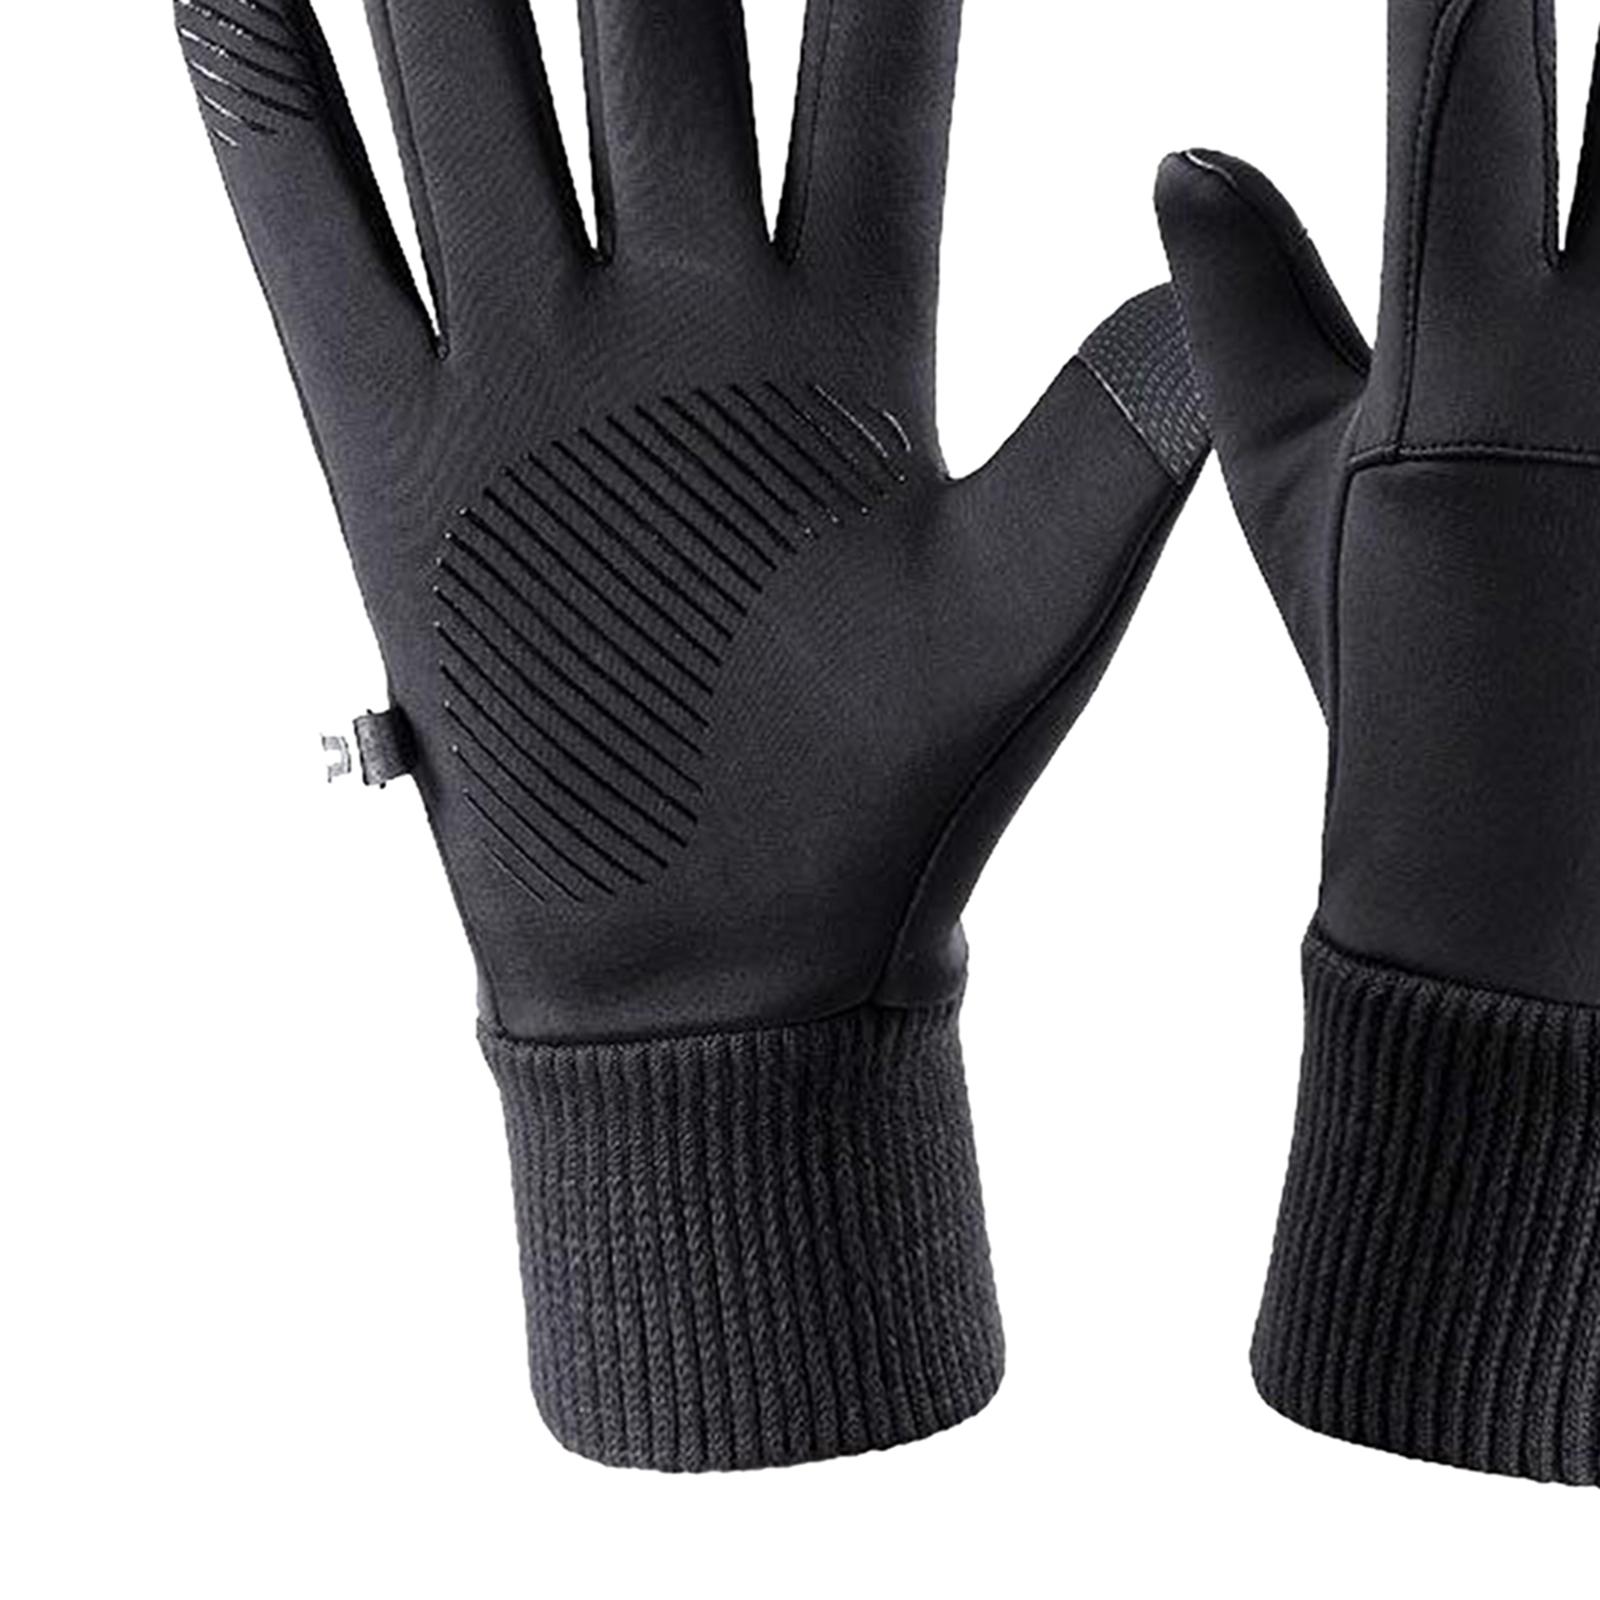 Winter Outdoor Cycling Hiking Sports Gloves Touch Screen L Black K147